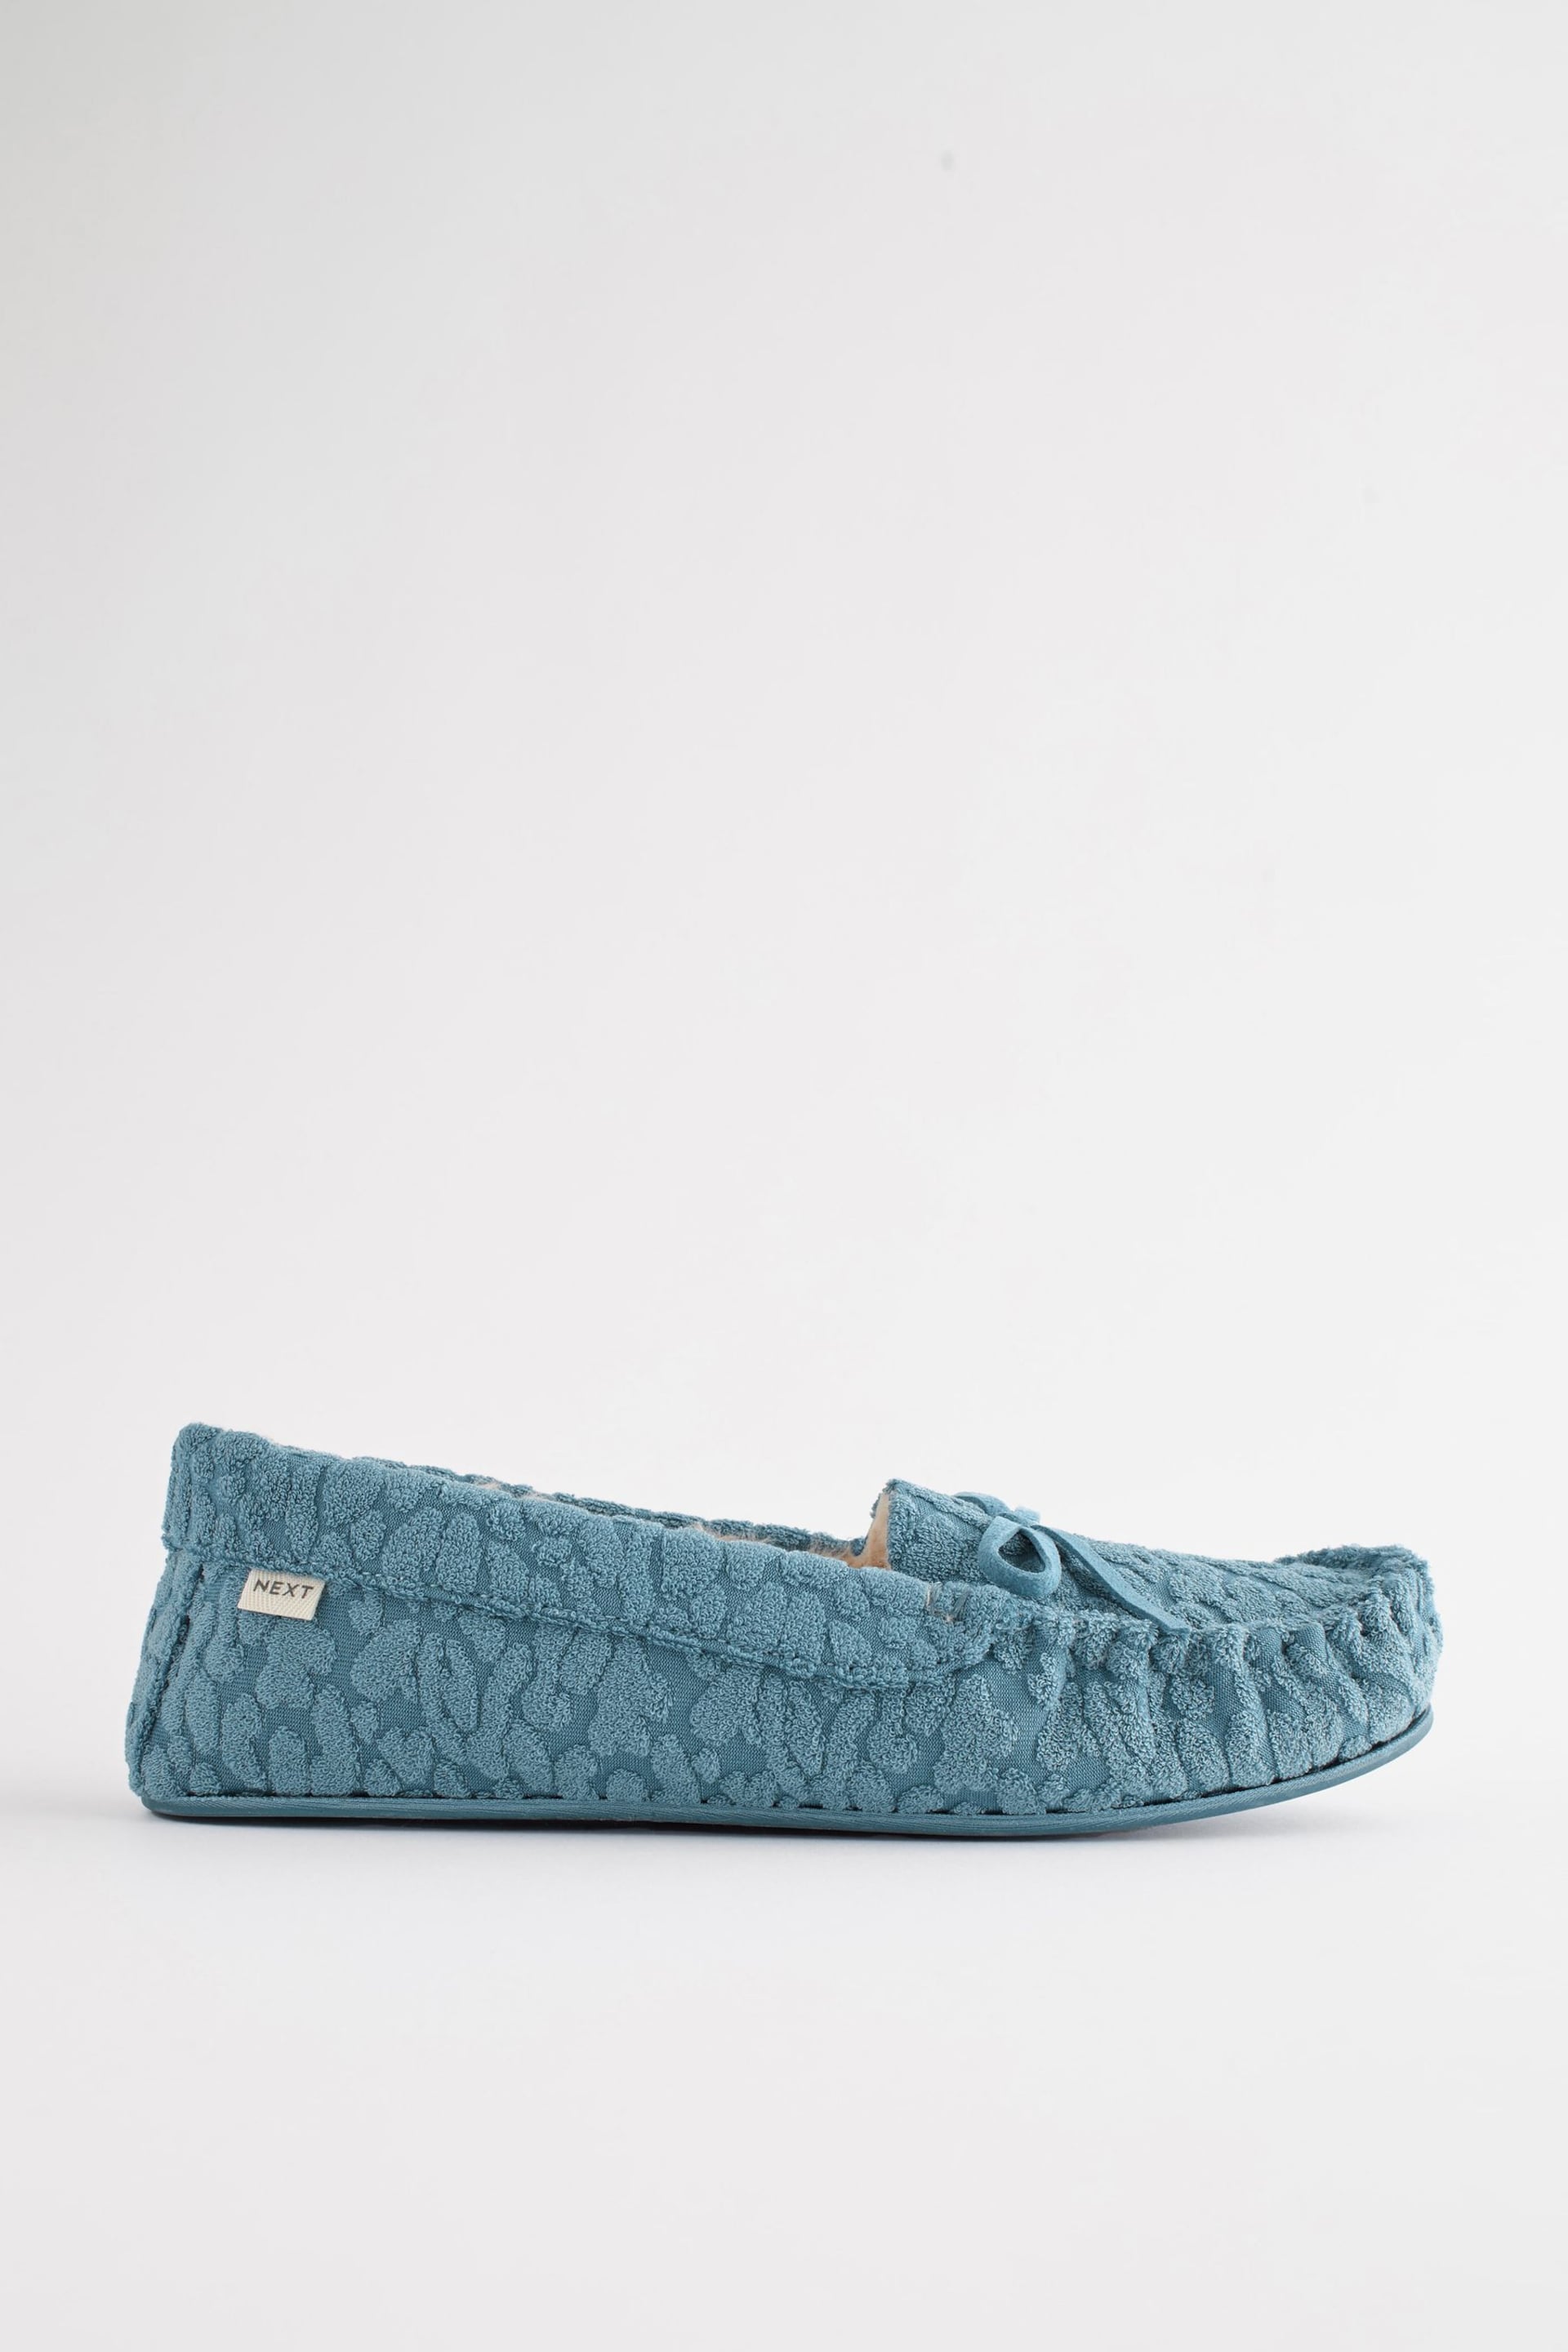 Blue Towelling Moccasins Slippers - Image 2 of 6